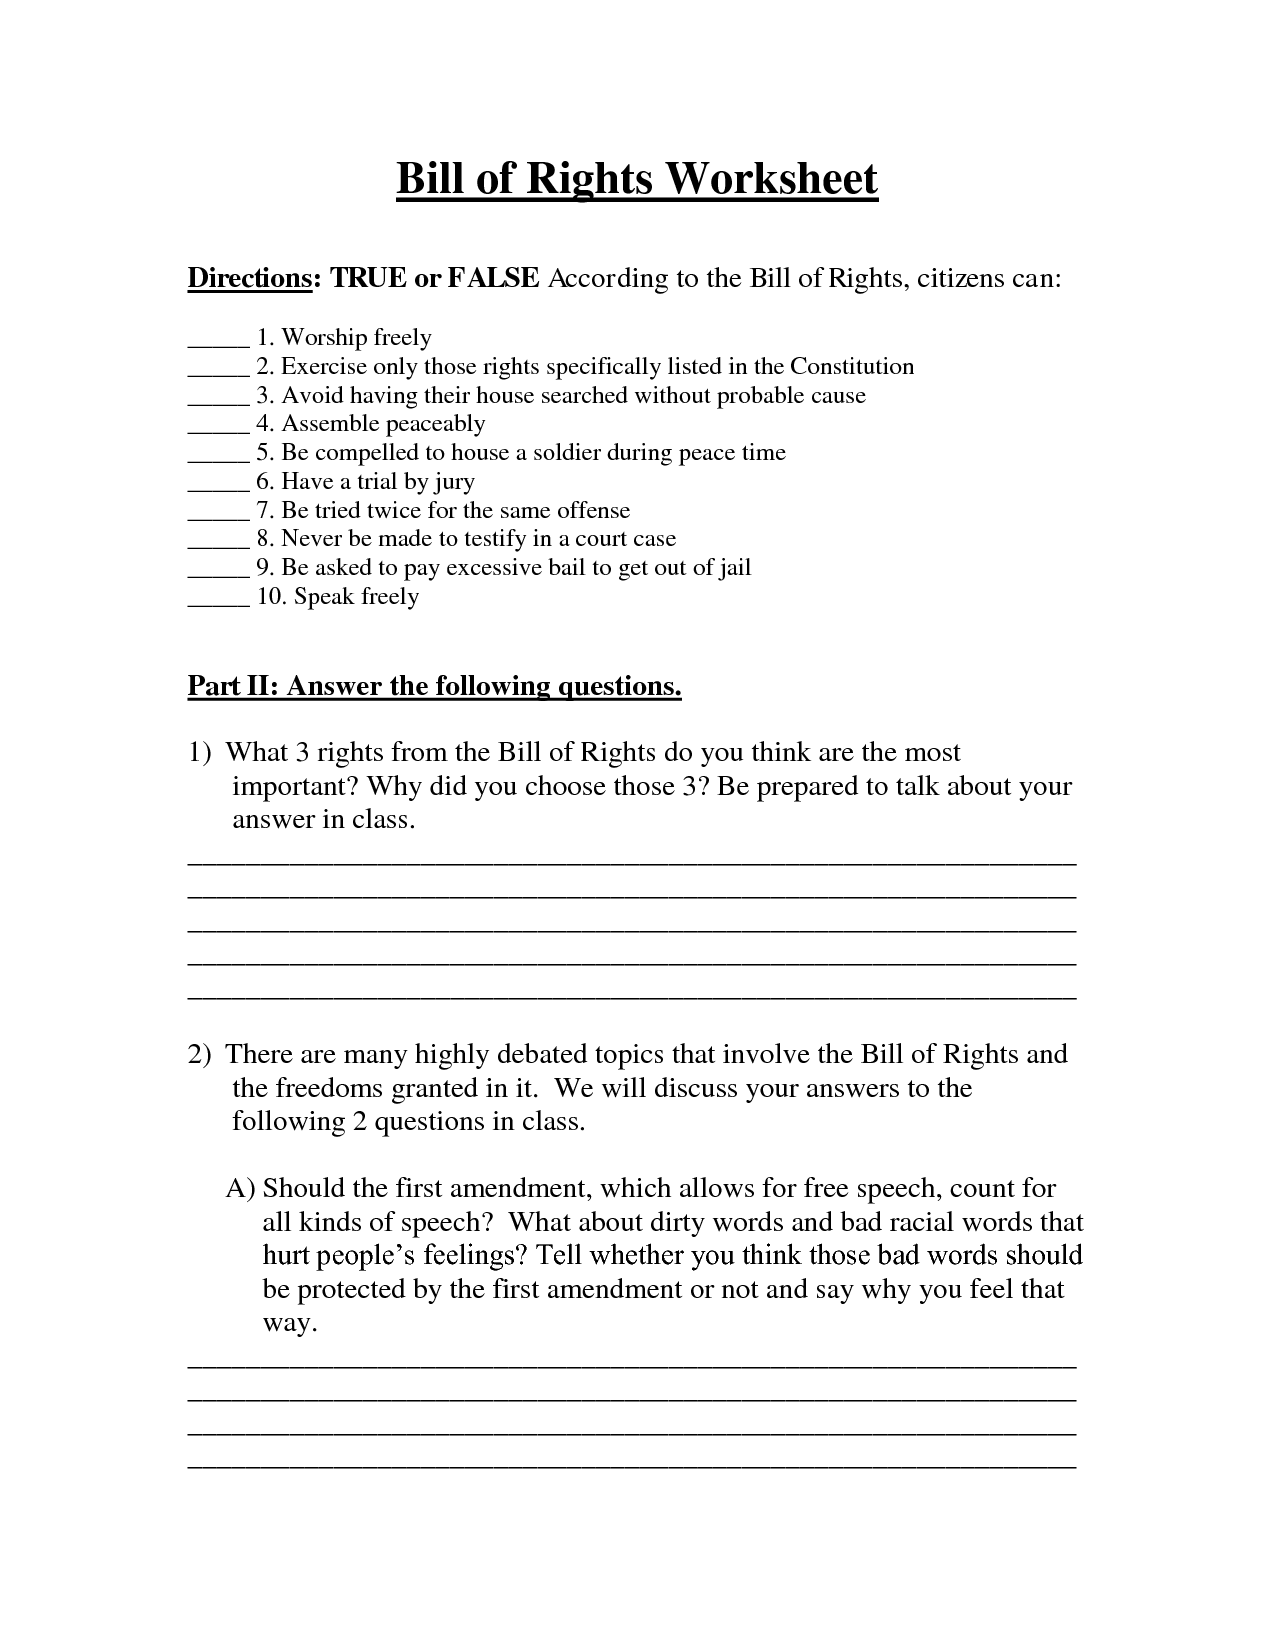 English Bill Of Rights Comparison Worksheet